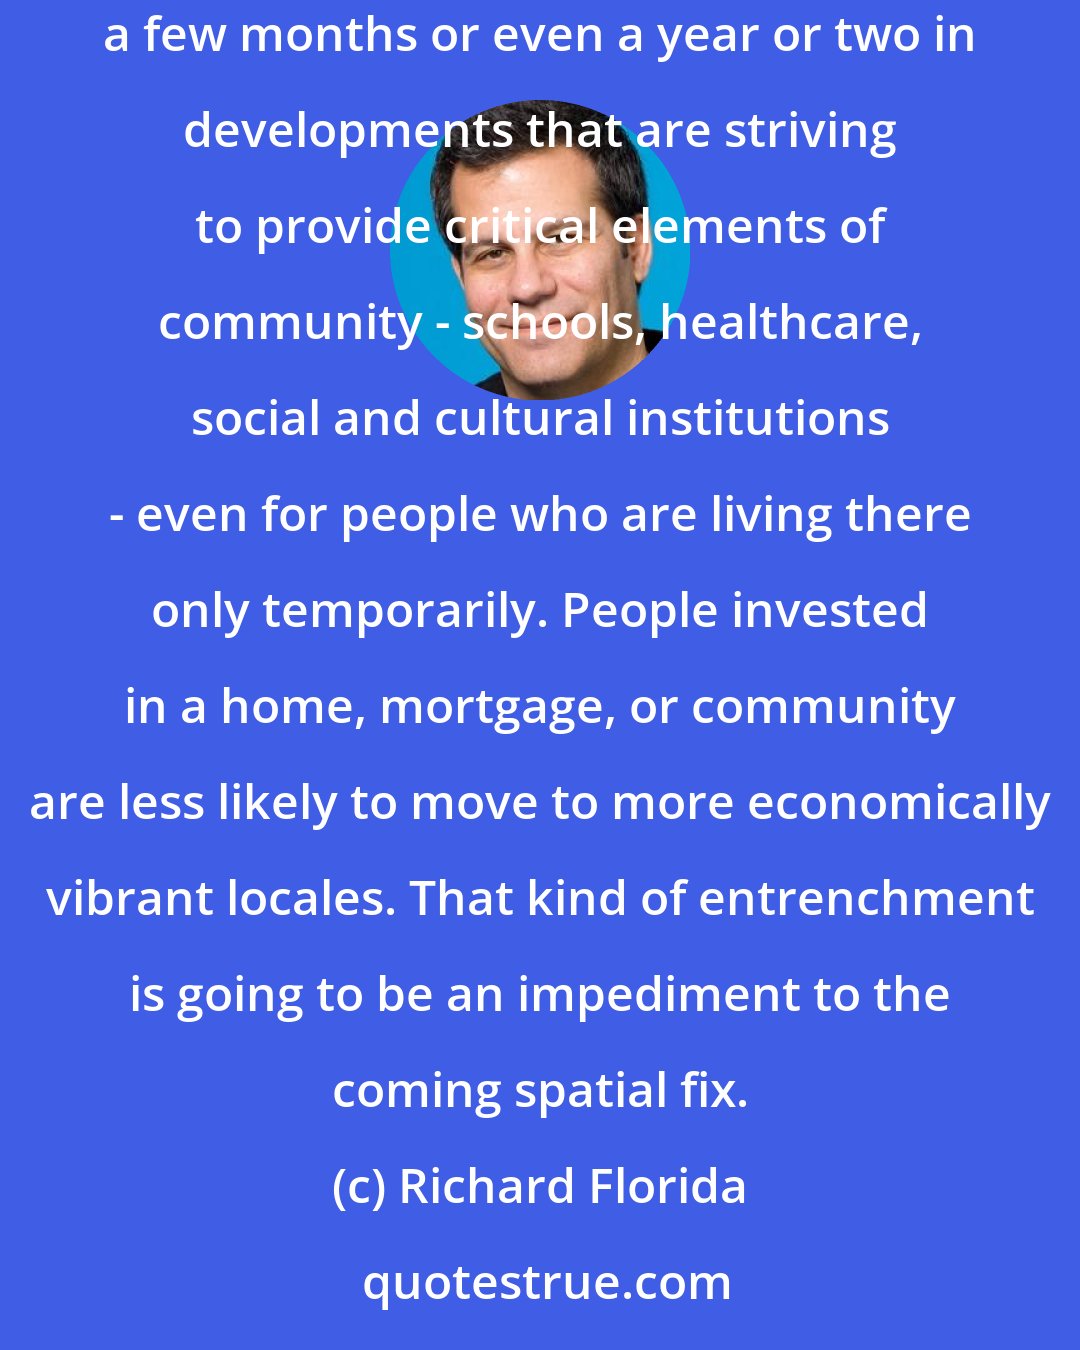 Richard Florida: Already, new forms of short-term and long-term rental housing are popping up in some metro areas. You can take on a house or apartment for a few months or even a year or two in developments that are striving to provide critical elements of community - schools, healthcare, social and cultural institutions - even for people who are living there only temporarily. People invested in a home, mortgage, or community are less likely to move to more economically vibrant locales. That kind of entrenchment is going to be an impediment to the coming spatial fix.